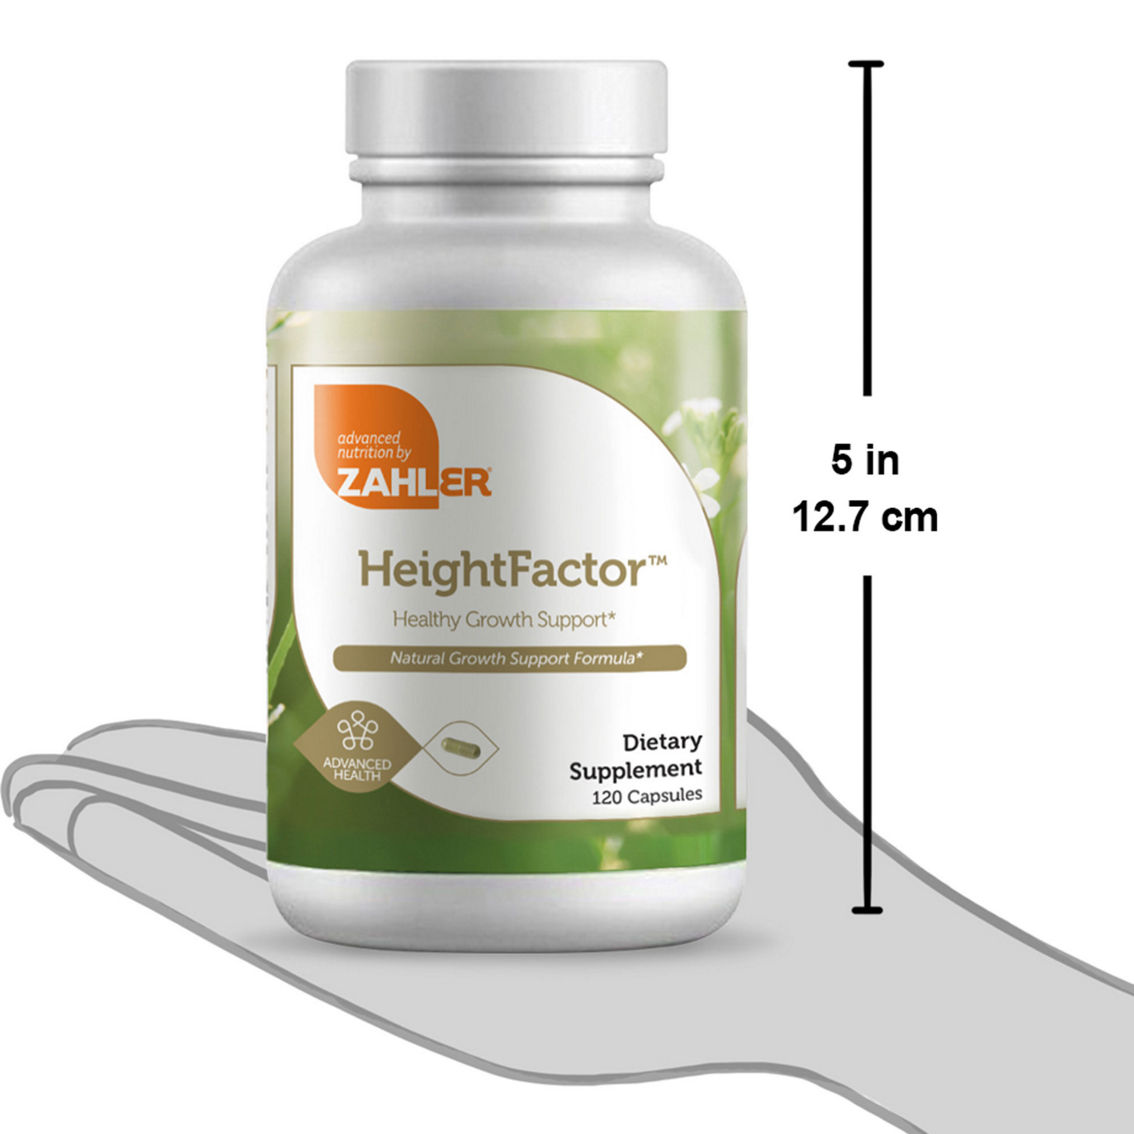 Zahler HeightFactor Height Growth Supplement Certified Kosher Capsules 120 ct. - Image 4 of 5